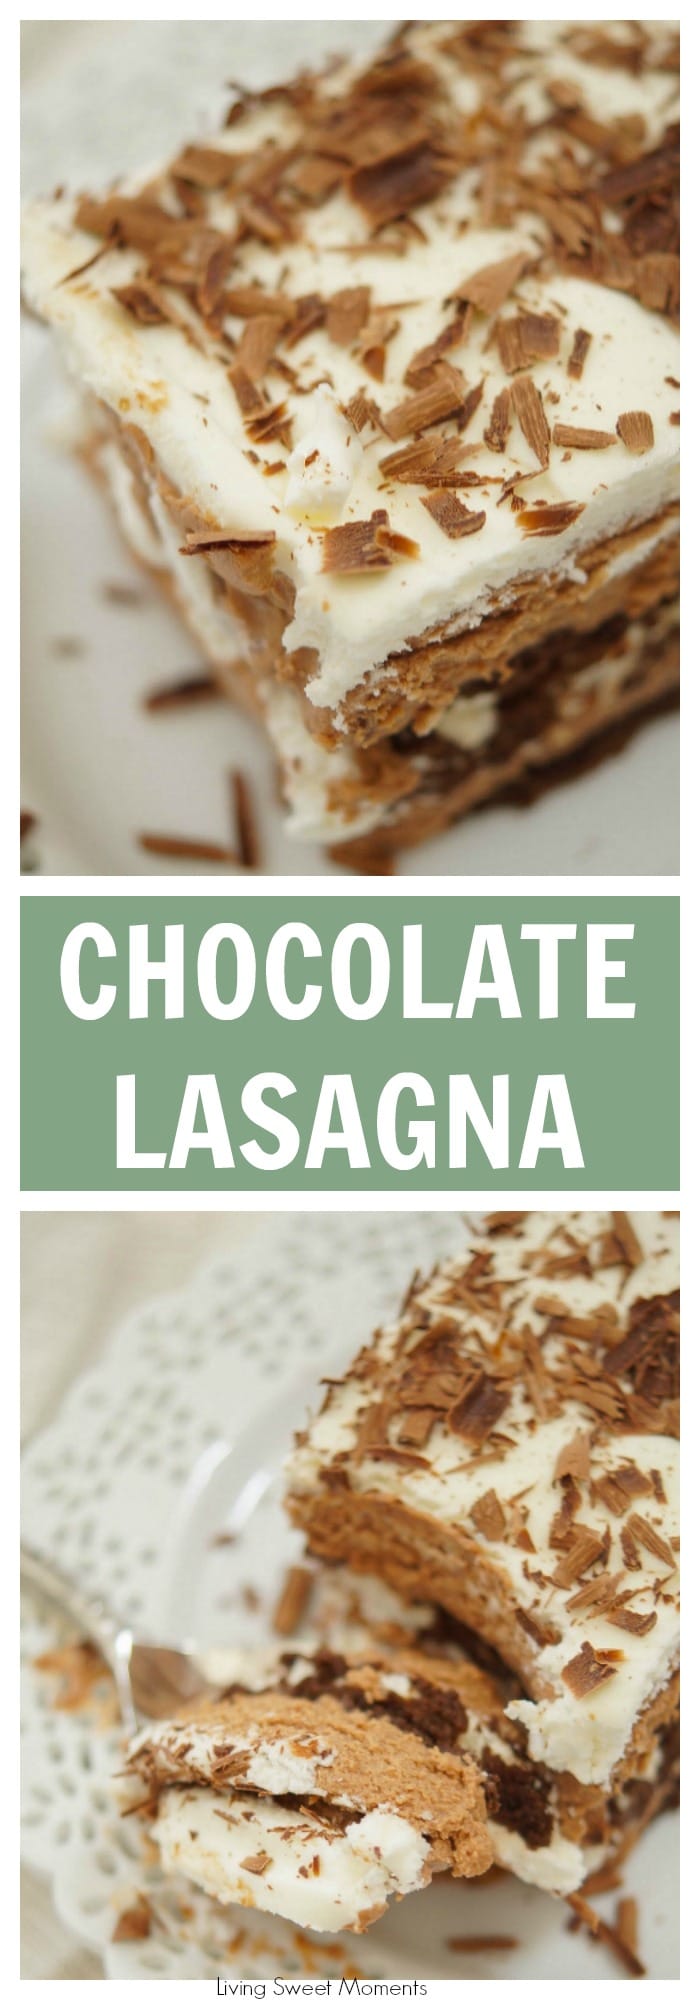 This scrumptious no-bake Chocolate Lasagna Recipe is made from scratch using mascarpone cream and real chocolate. Super easy to make and delish!